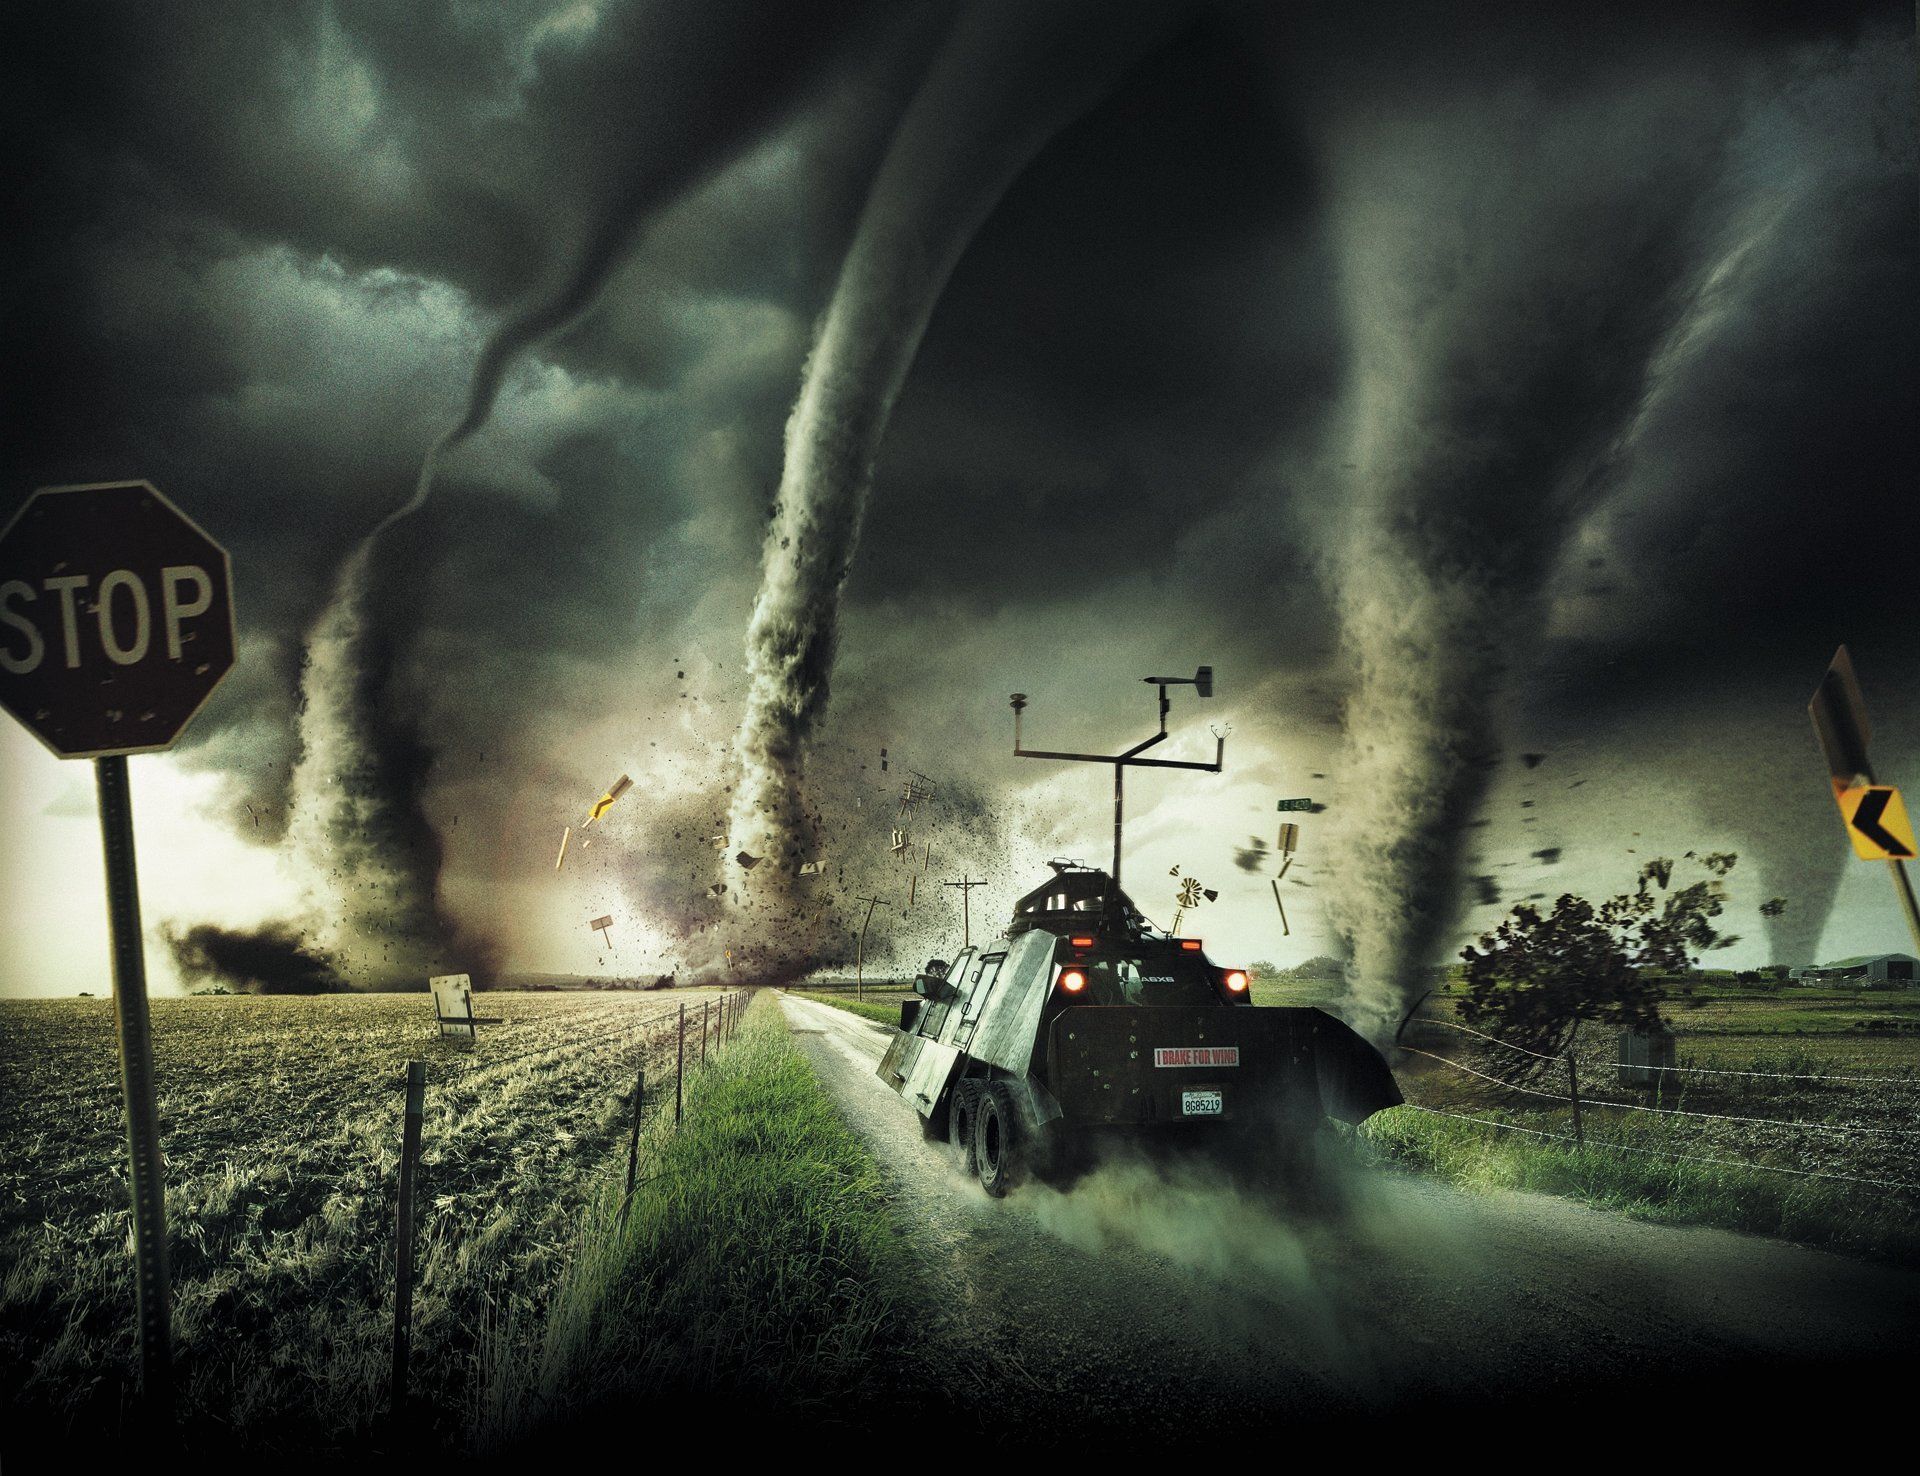 Wallpapers Weather Clouds Tornado Rain Cyclone Flashlights Awesome